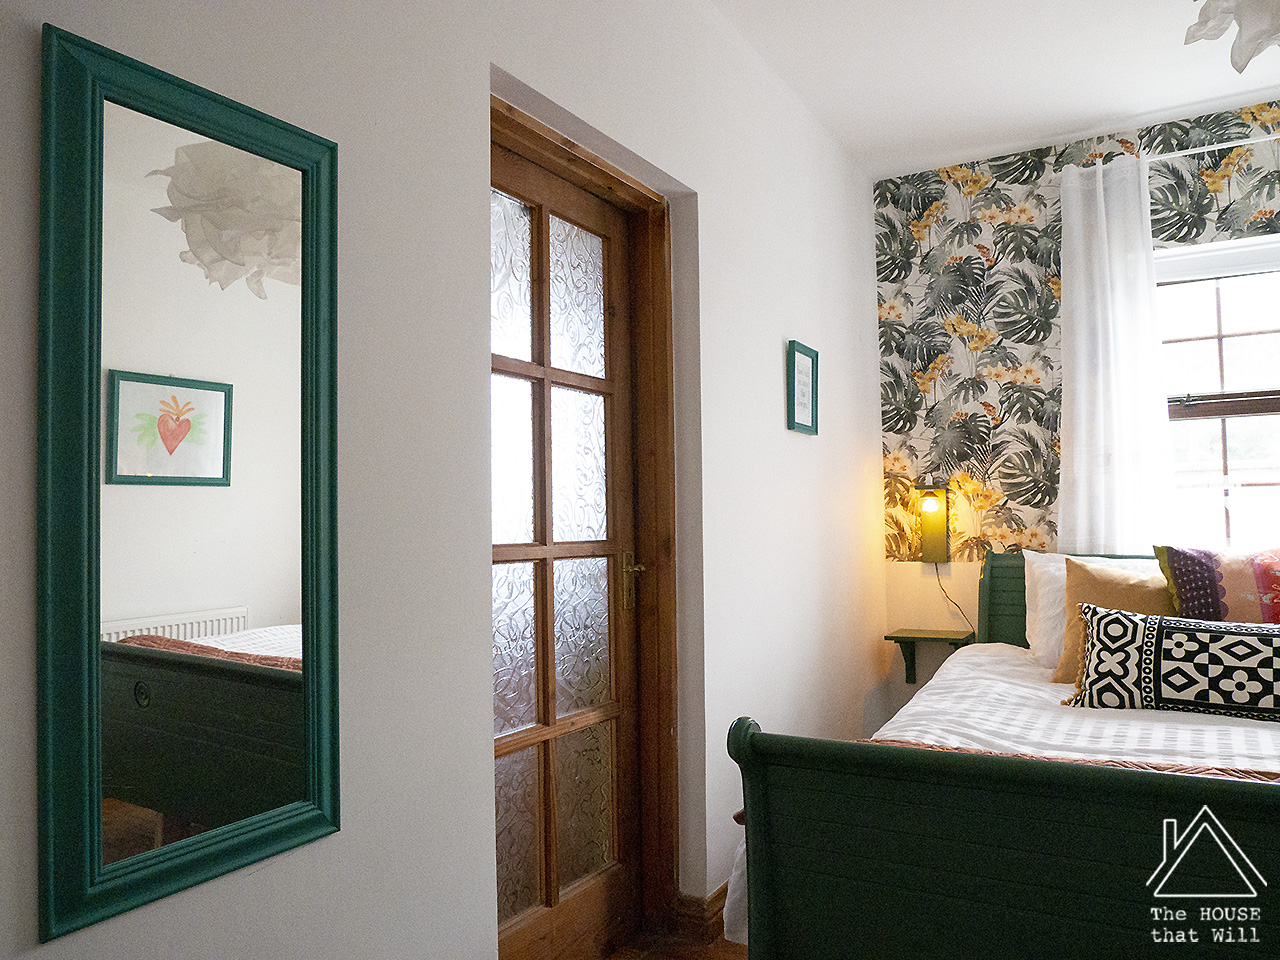 The House that Will | Budget Decor: €125 Master Bedroom